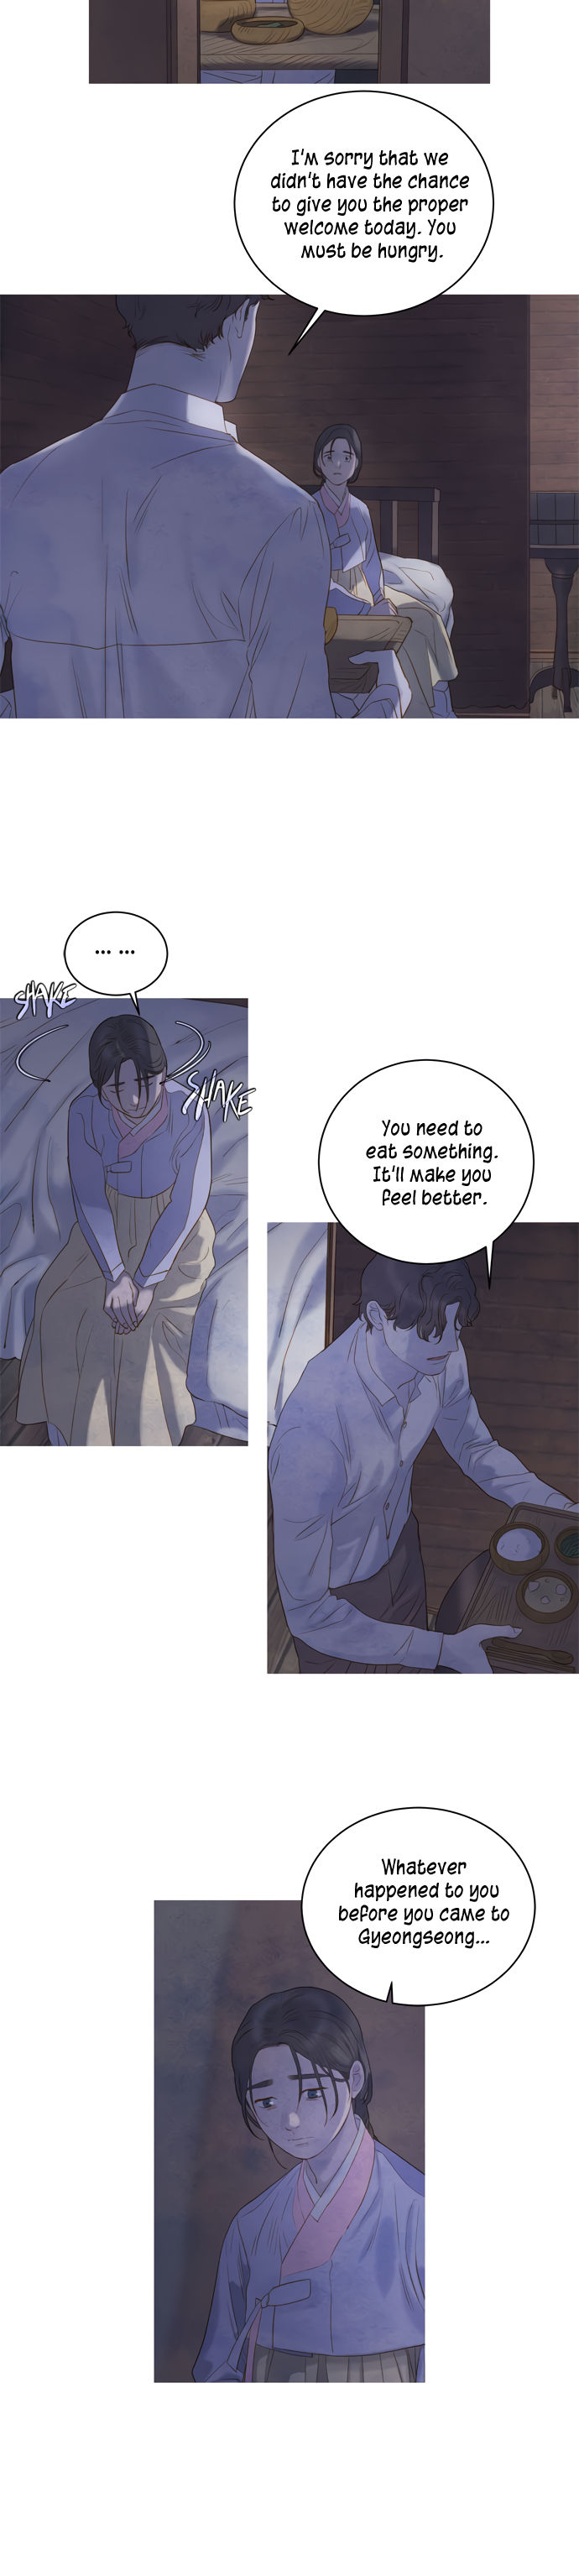 Gorae Byul - The Gyeongseong Mermaid - Chapter 19 Page 29